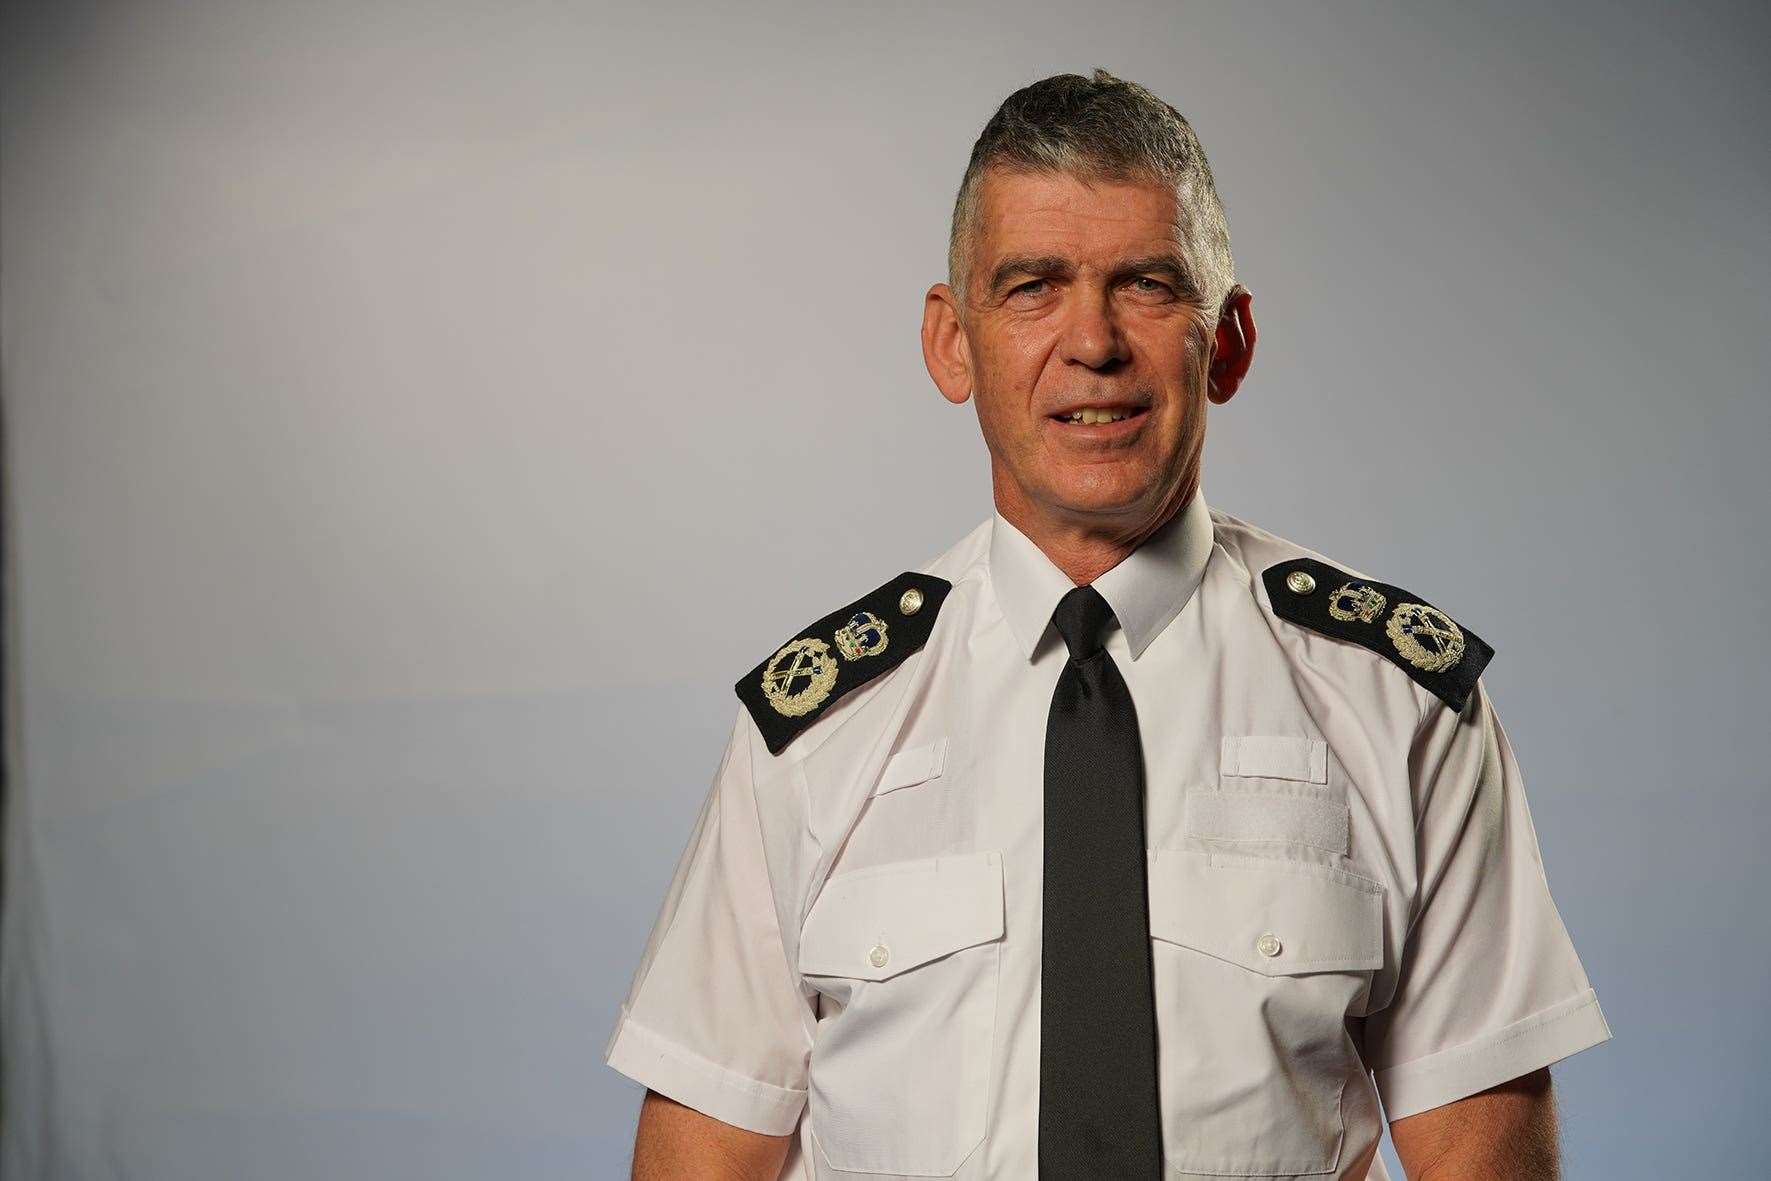 Senior police officer honoured for service says forces had to ‘hold